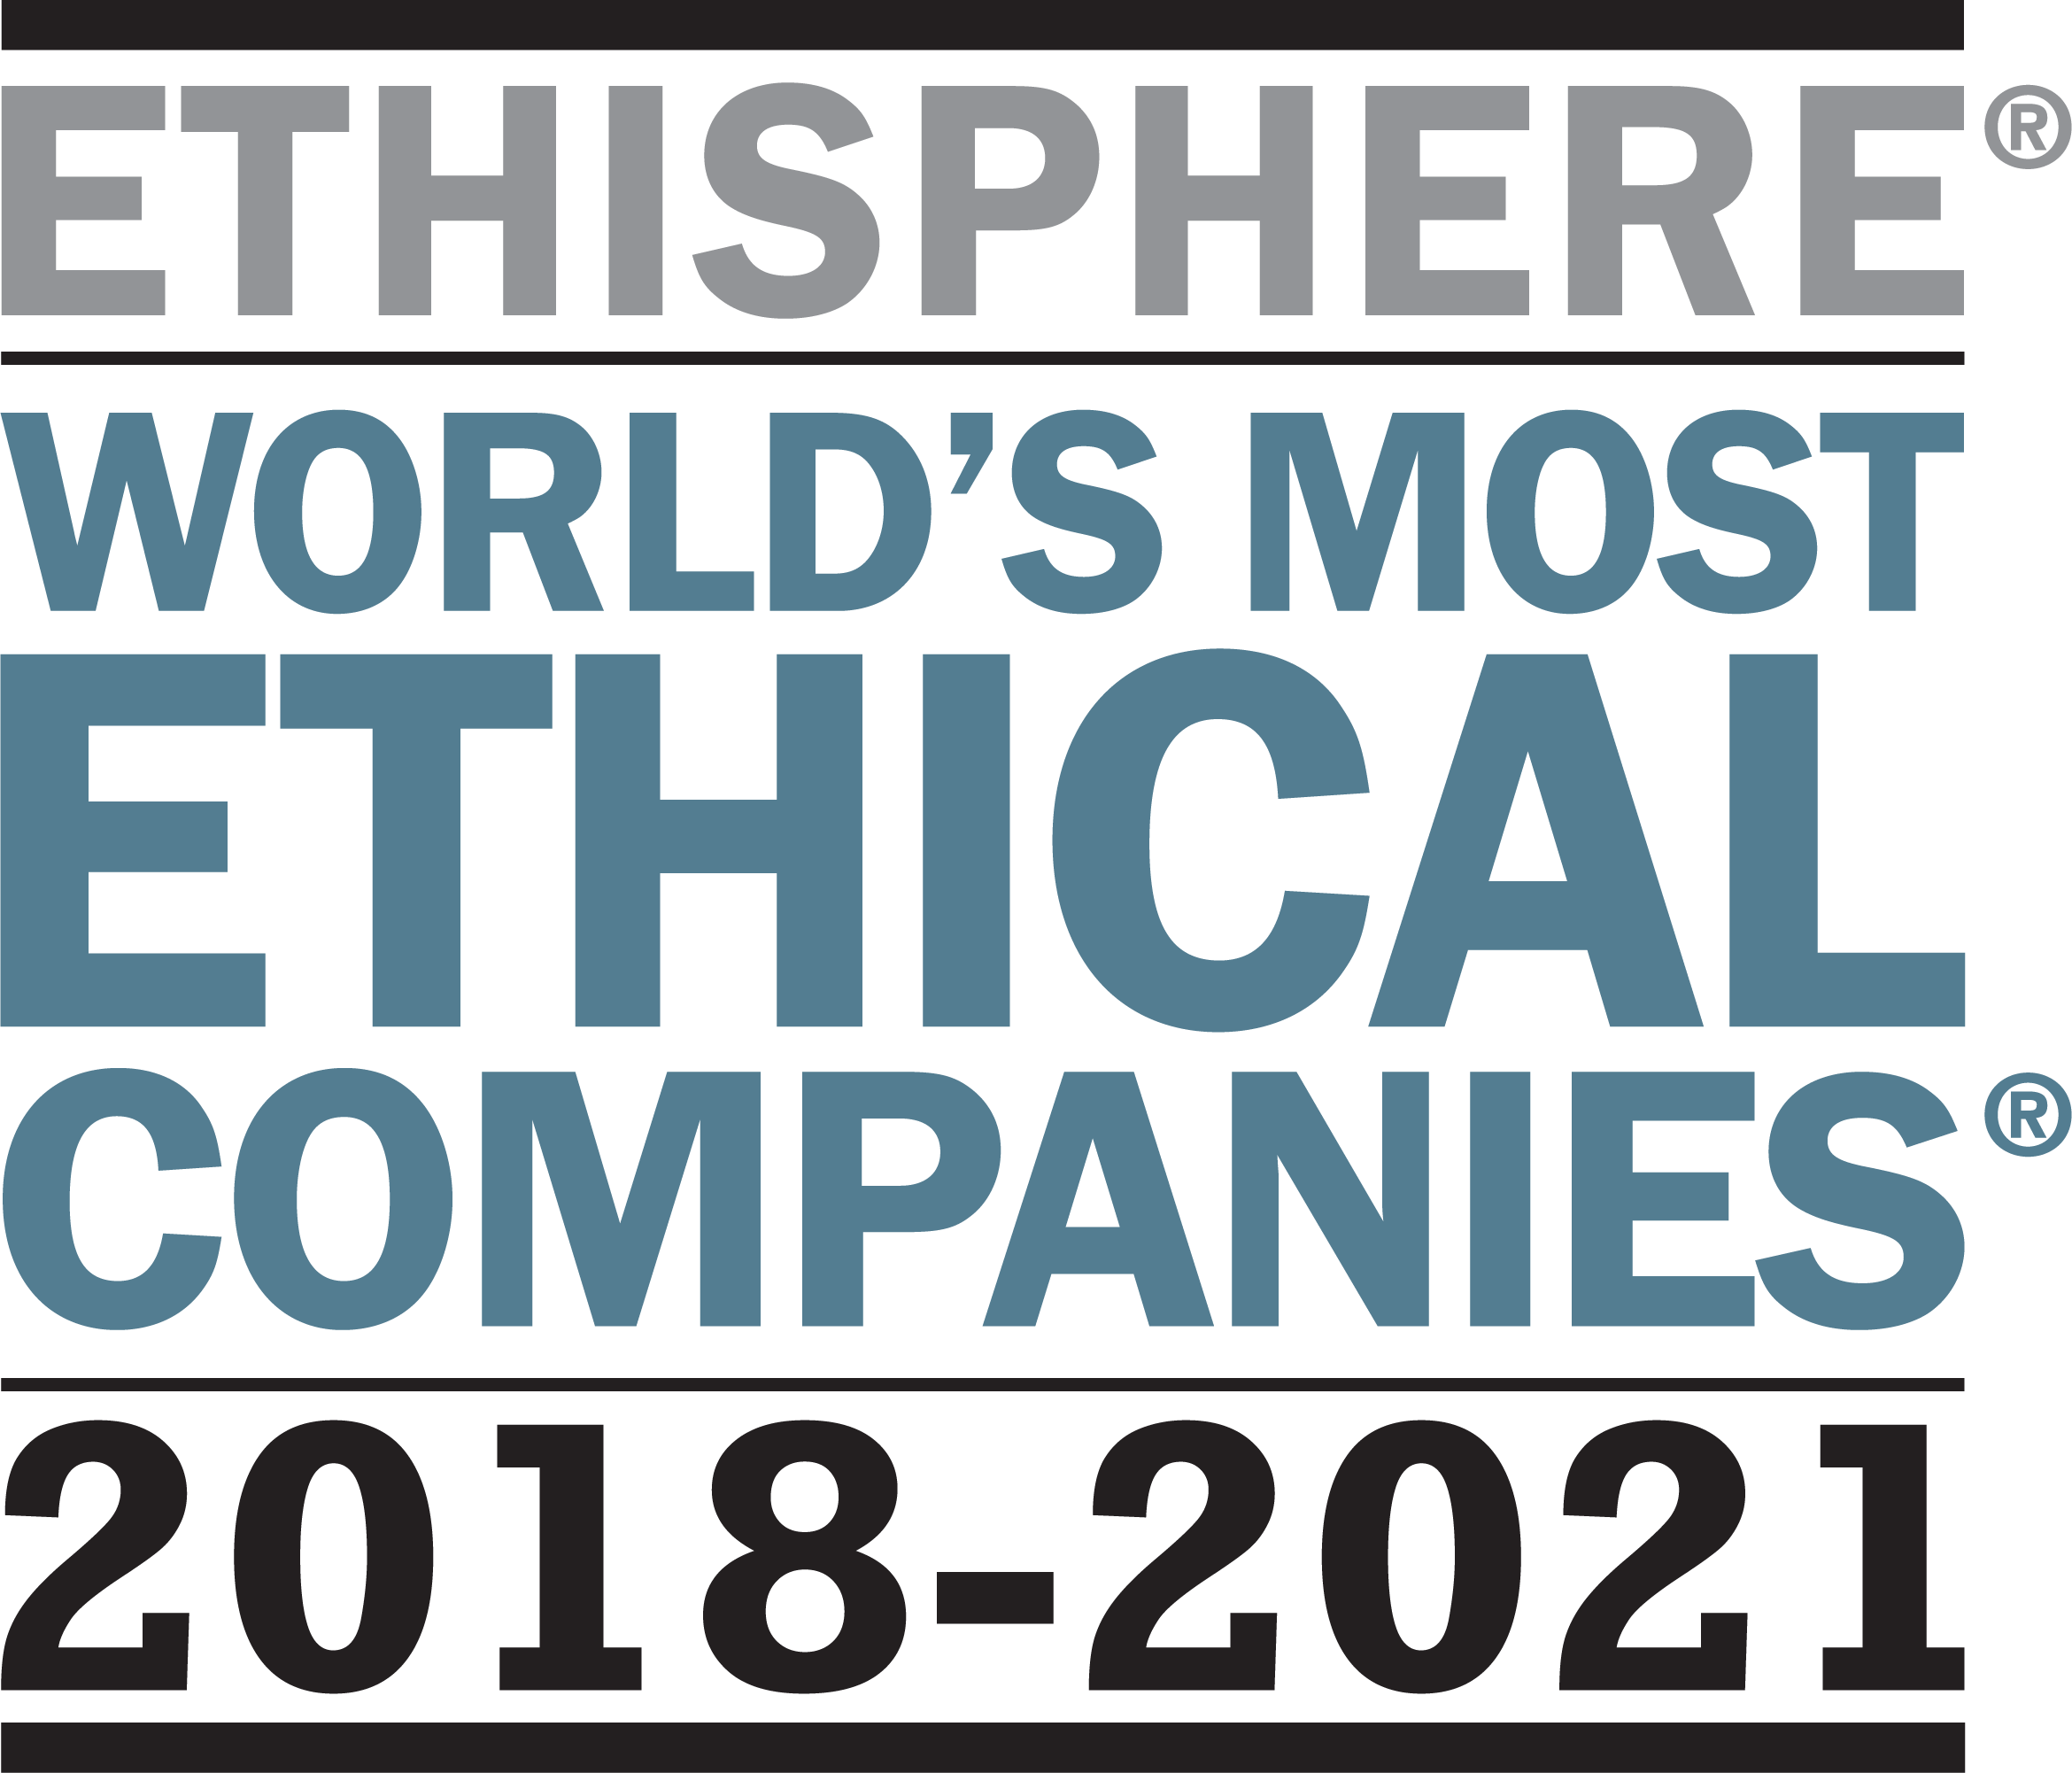 ambia is one of Ethisphere's World's Most Ethical Companies, 2018-2021